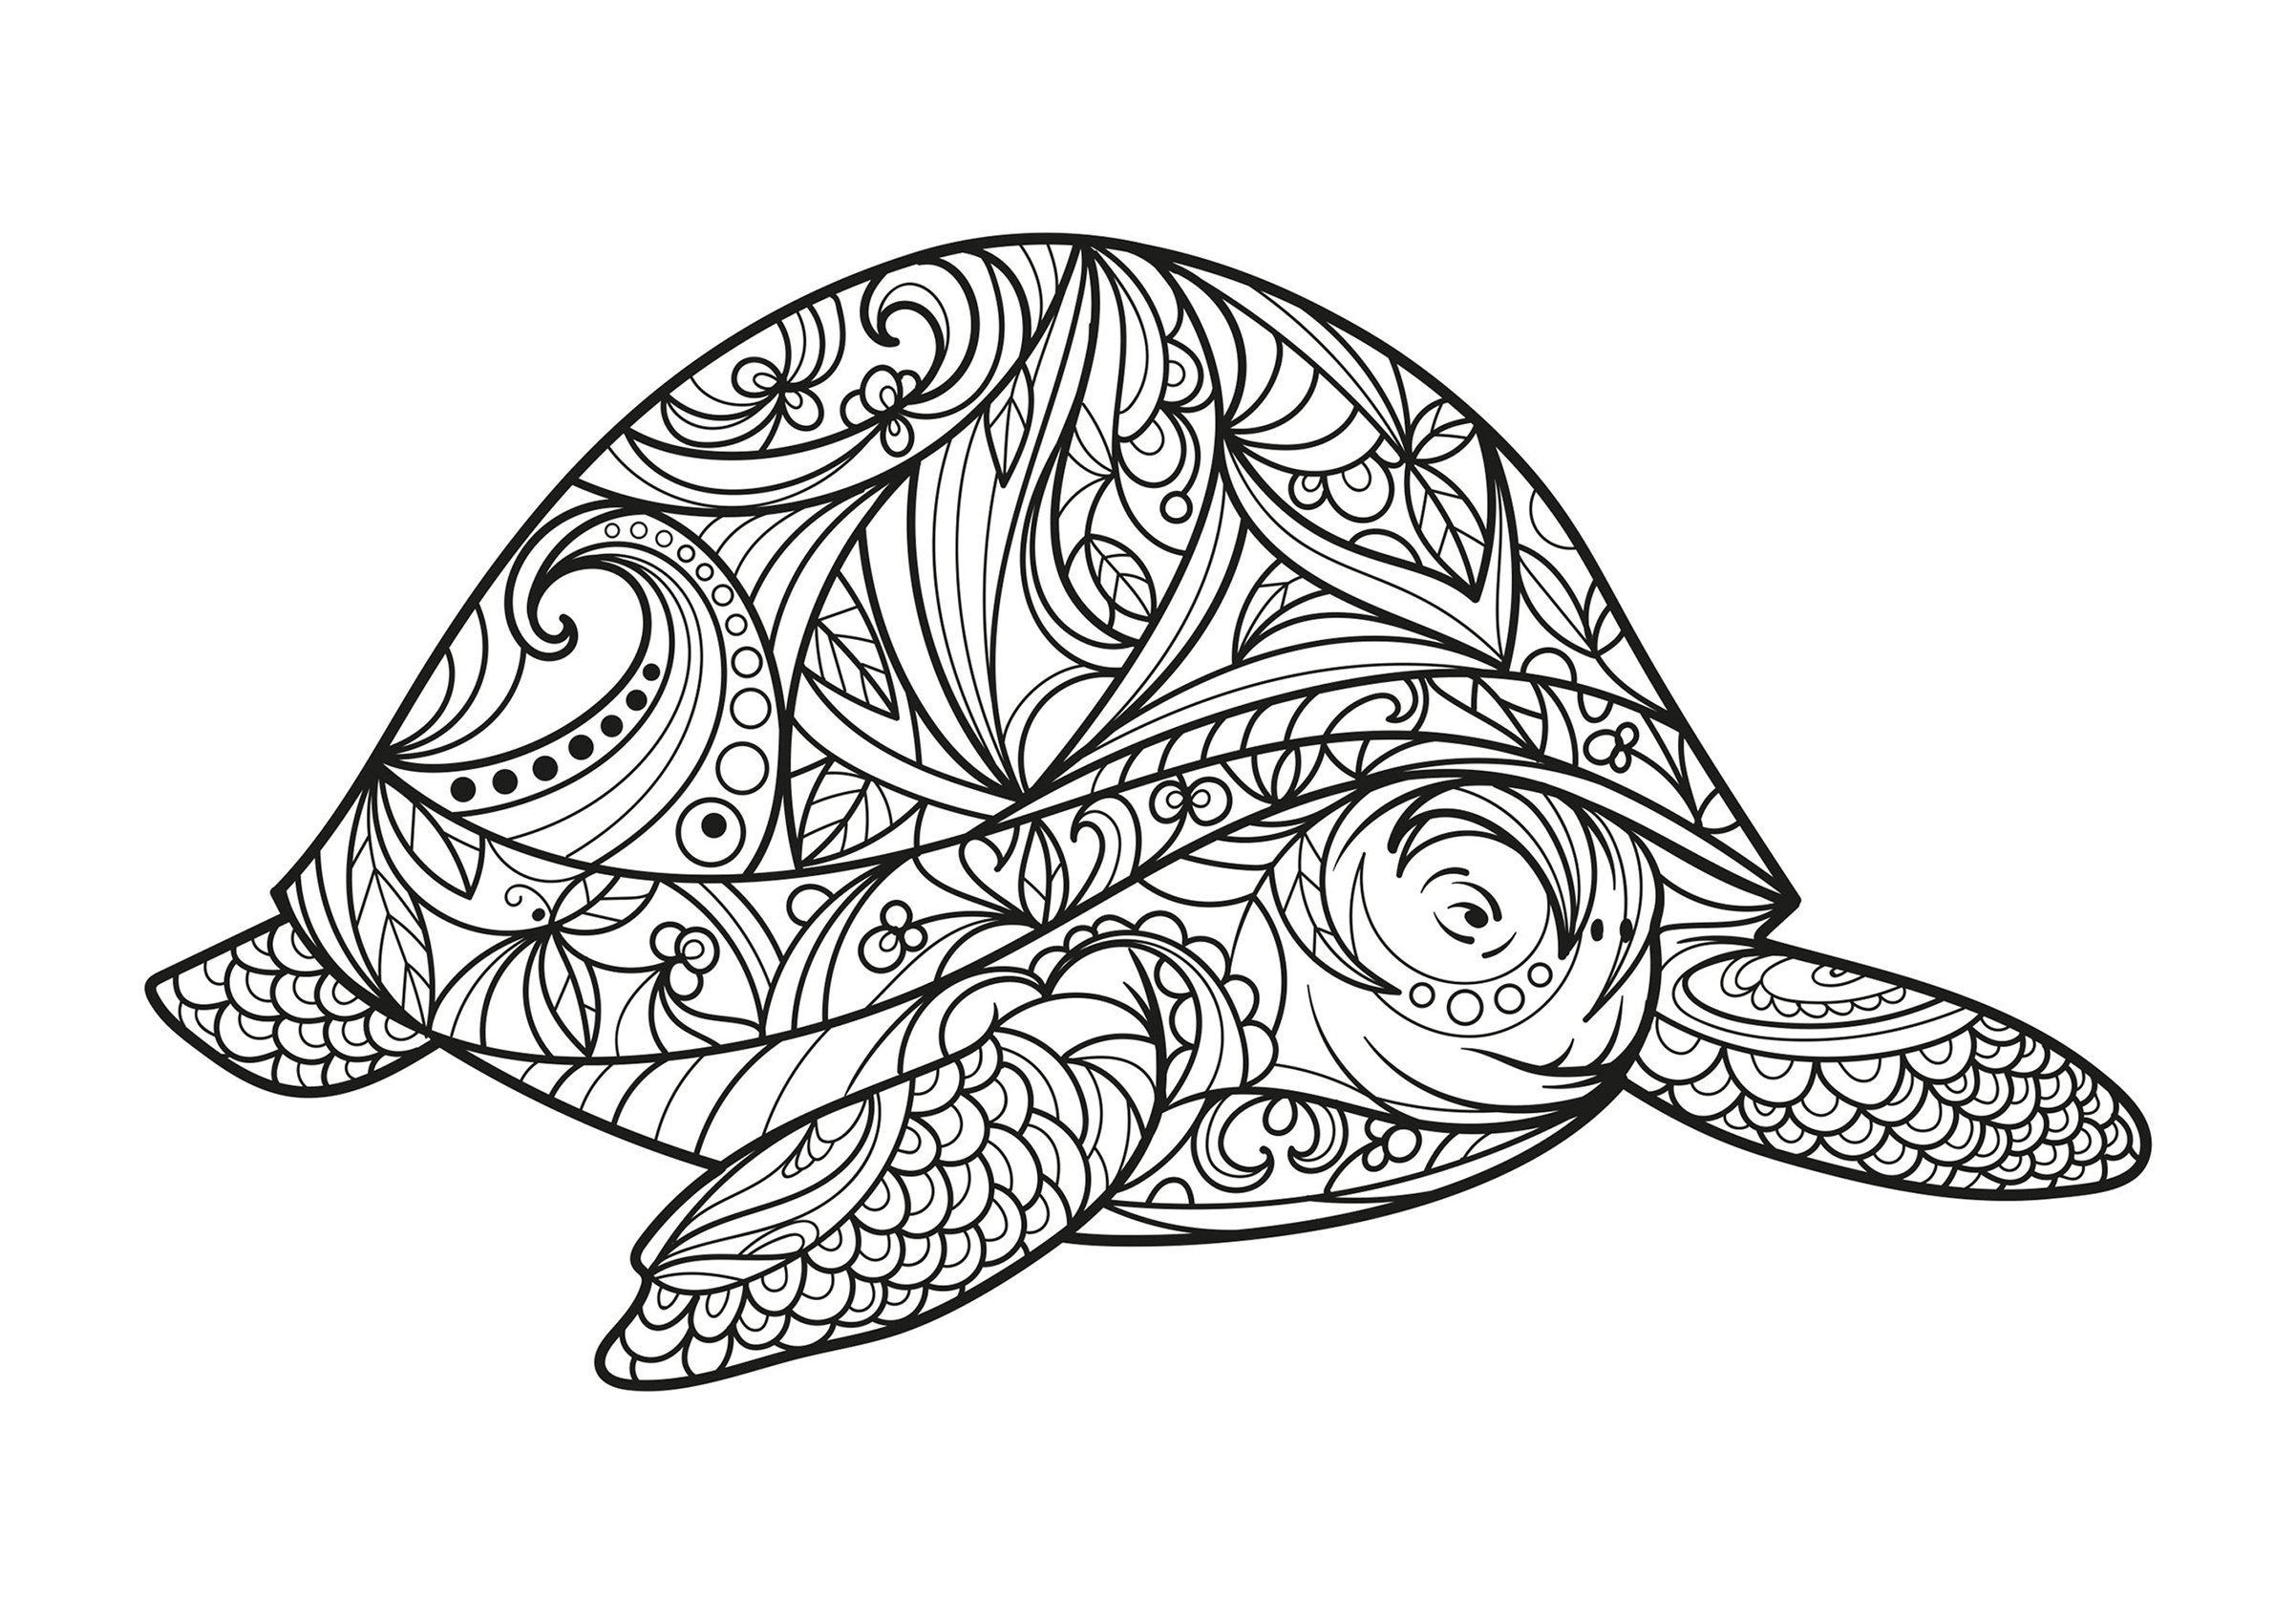 Big turtle with Zentangle patterns, Source : 123rf   Artist : Alexpokusay